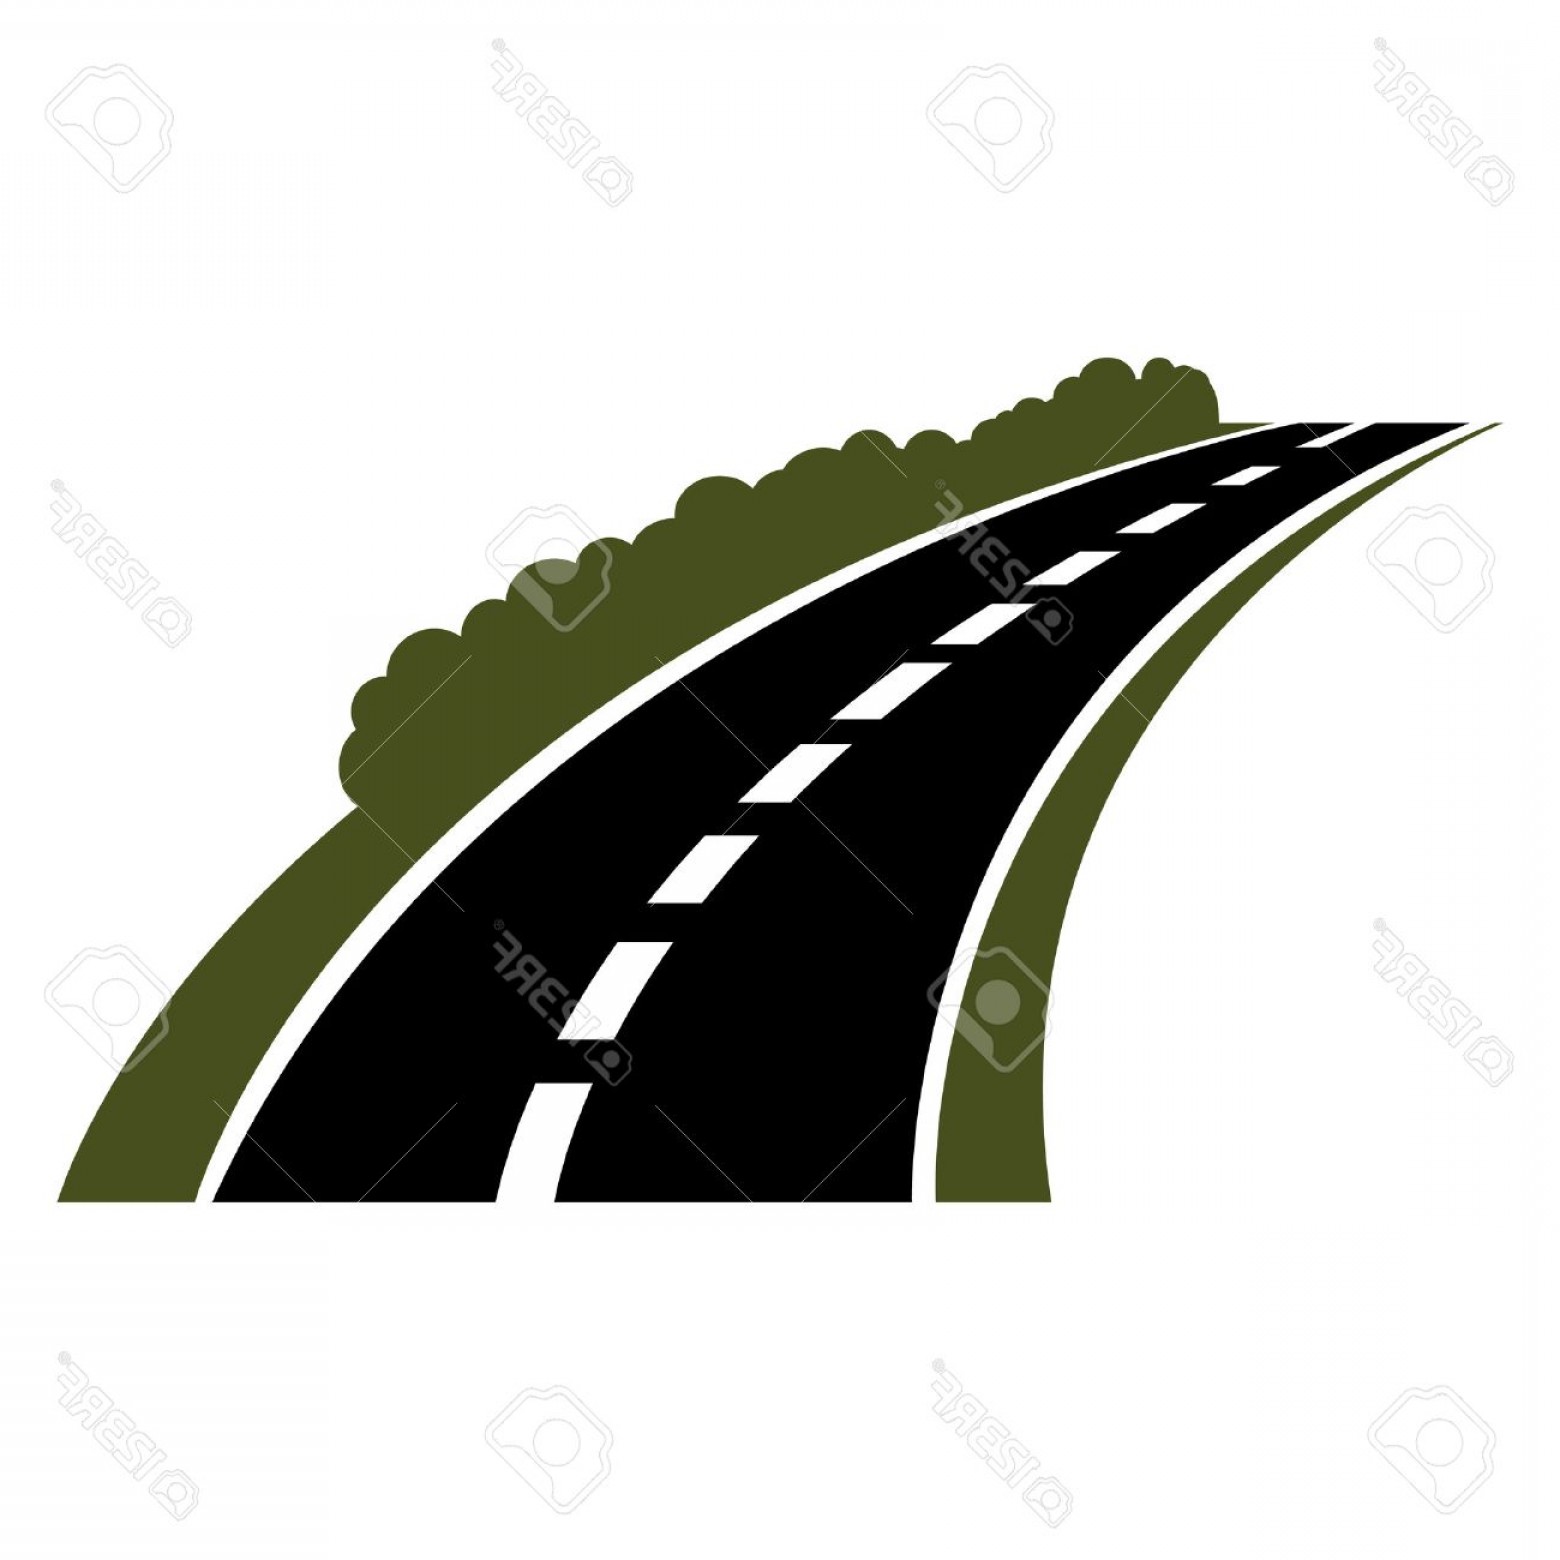 highway clipart paved road